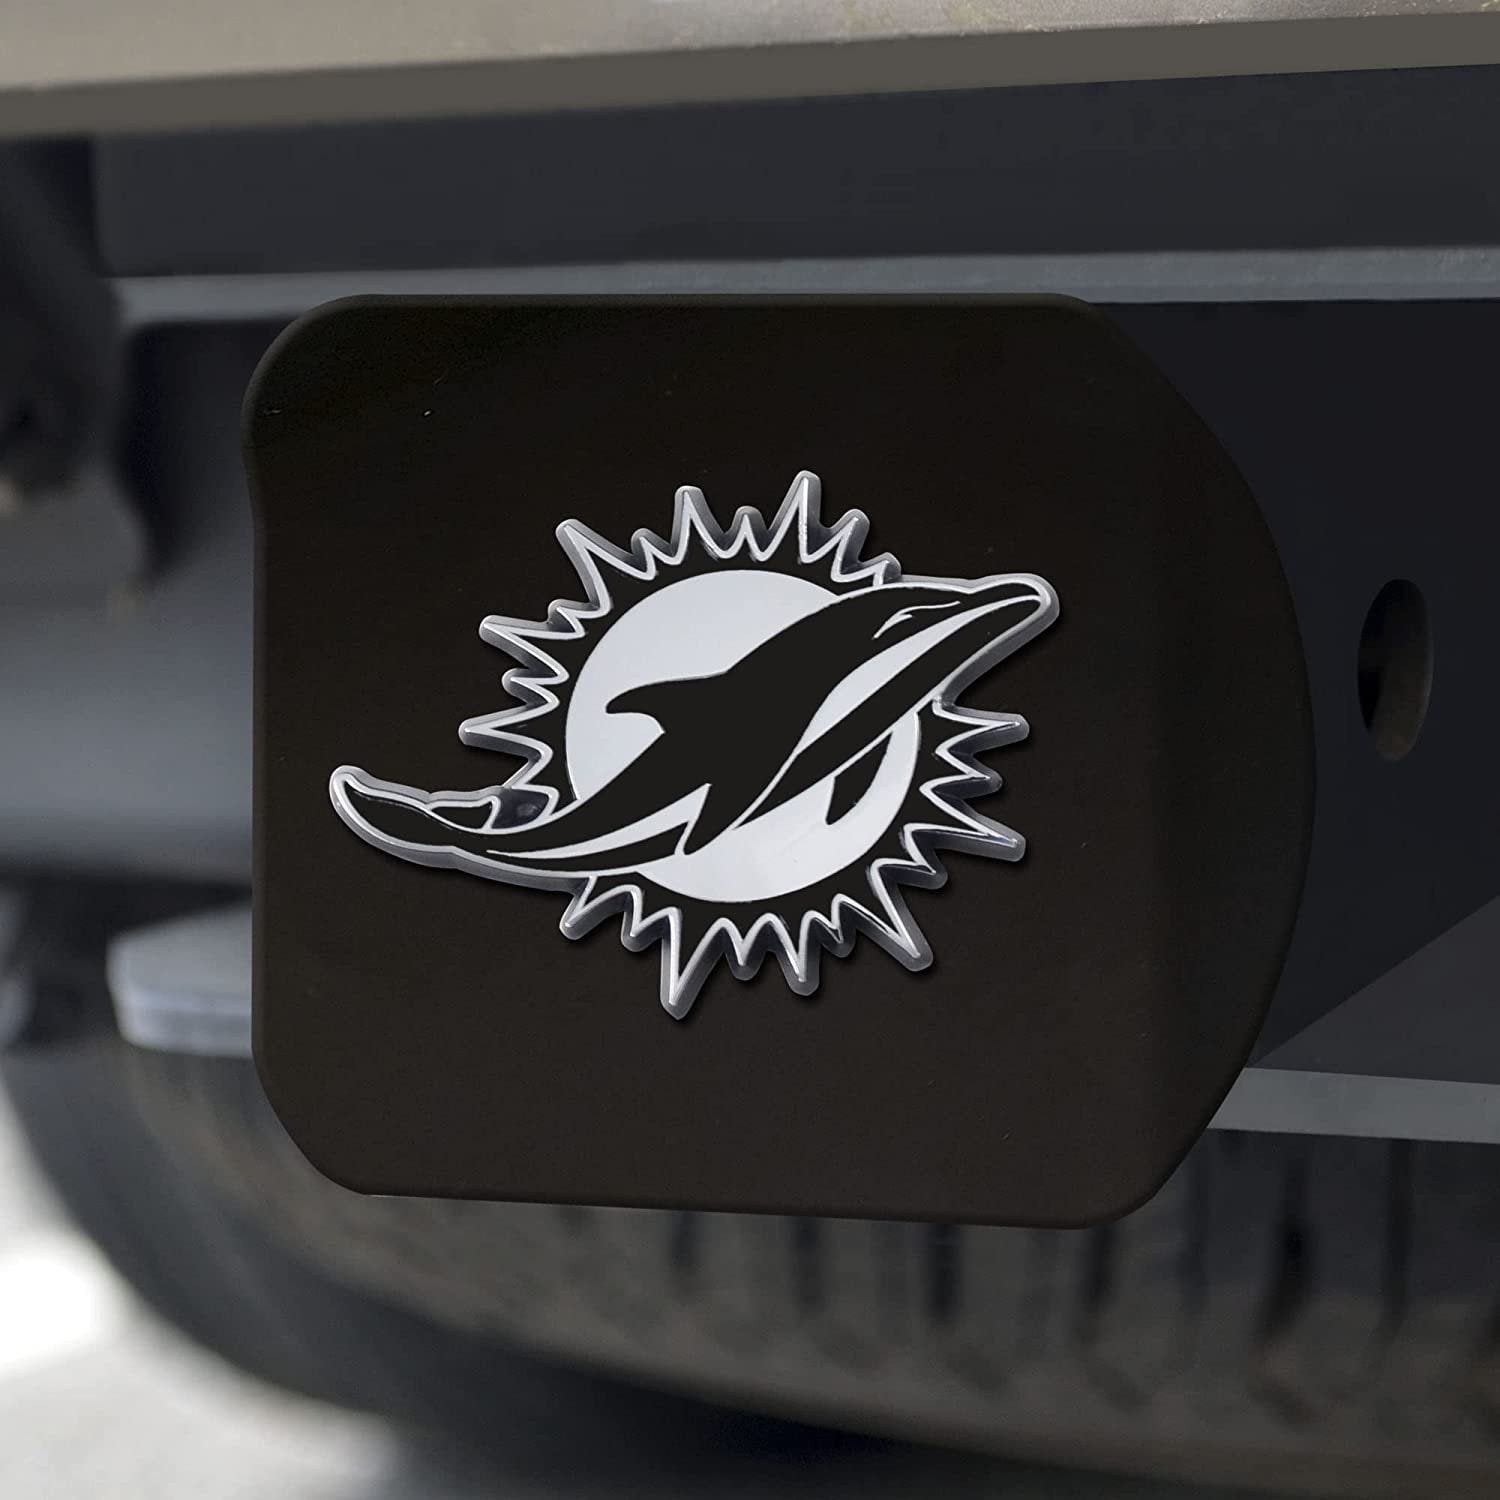 NFL Miami Dolphins Metal Hitch Cover, Black, 2" Square Type III Hitch Cover